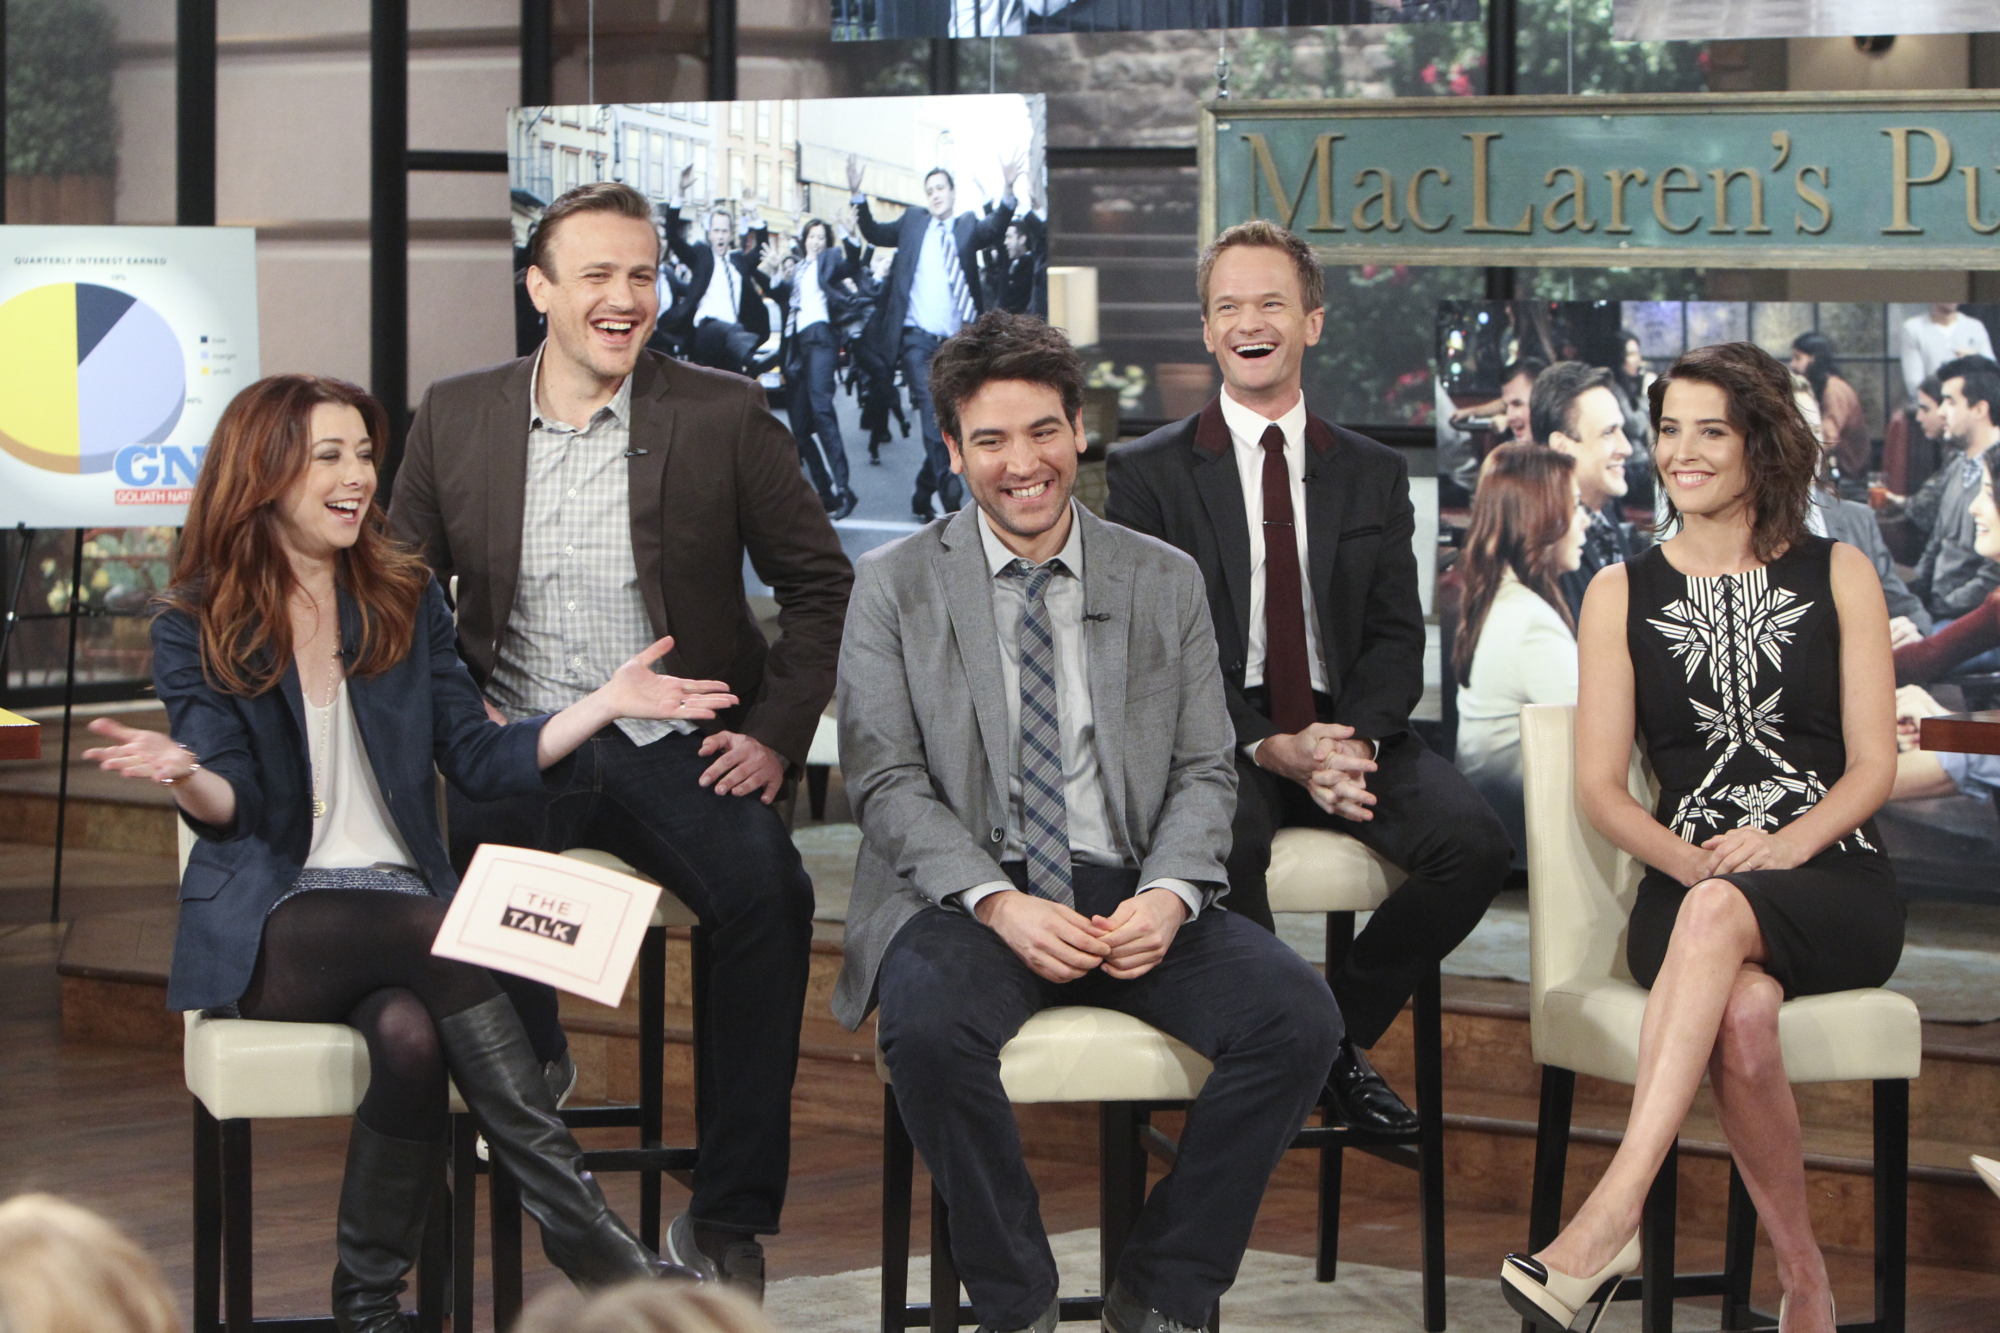 LOS ANGELES - JANUARY 27: The cast of "How I Met Your Mother" gathers to discuss the show'­s 200th episode and final season on THE TALK, Monday, January 27, 2014 on the CBS Television Network. Alyson Hannigan, from left, Jason Segel, Josh Radnor, Neil Patrick Harris and Cobie Smulders, shown.